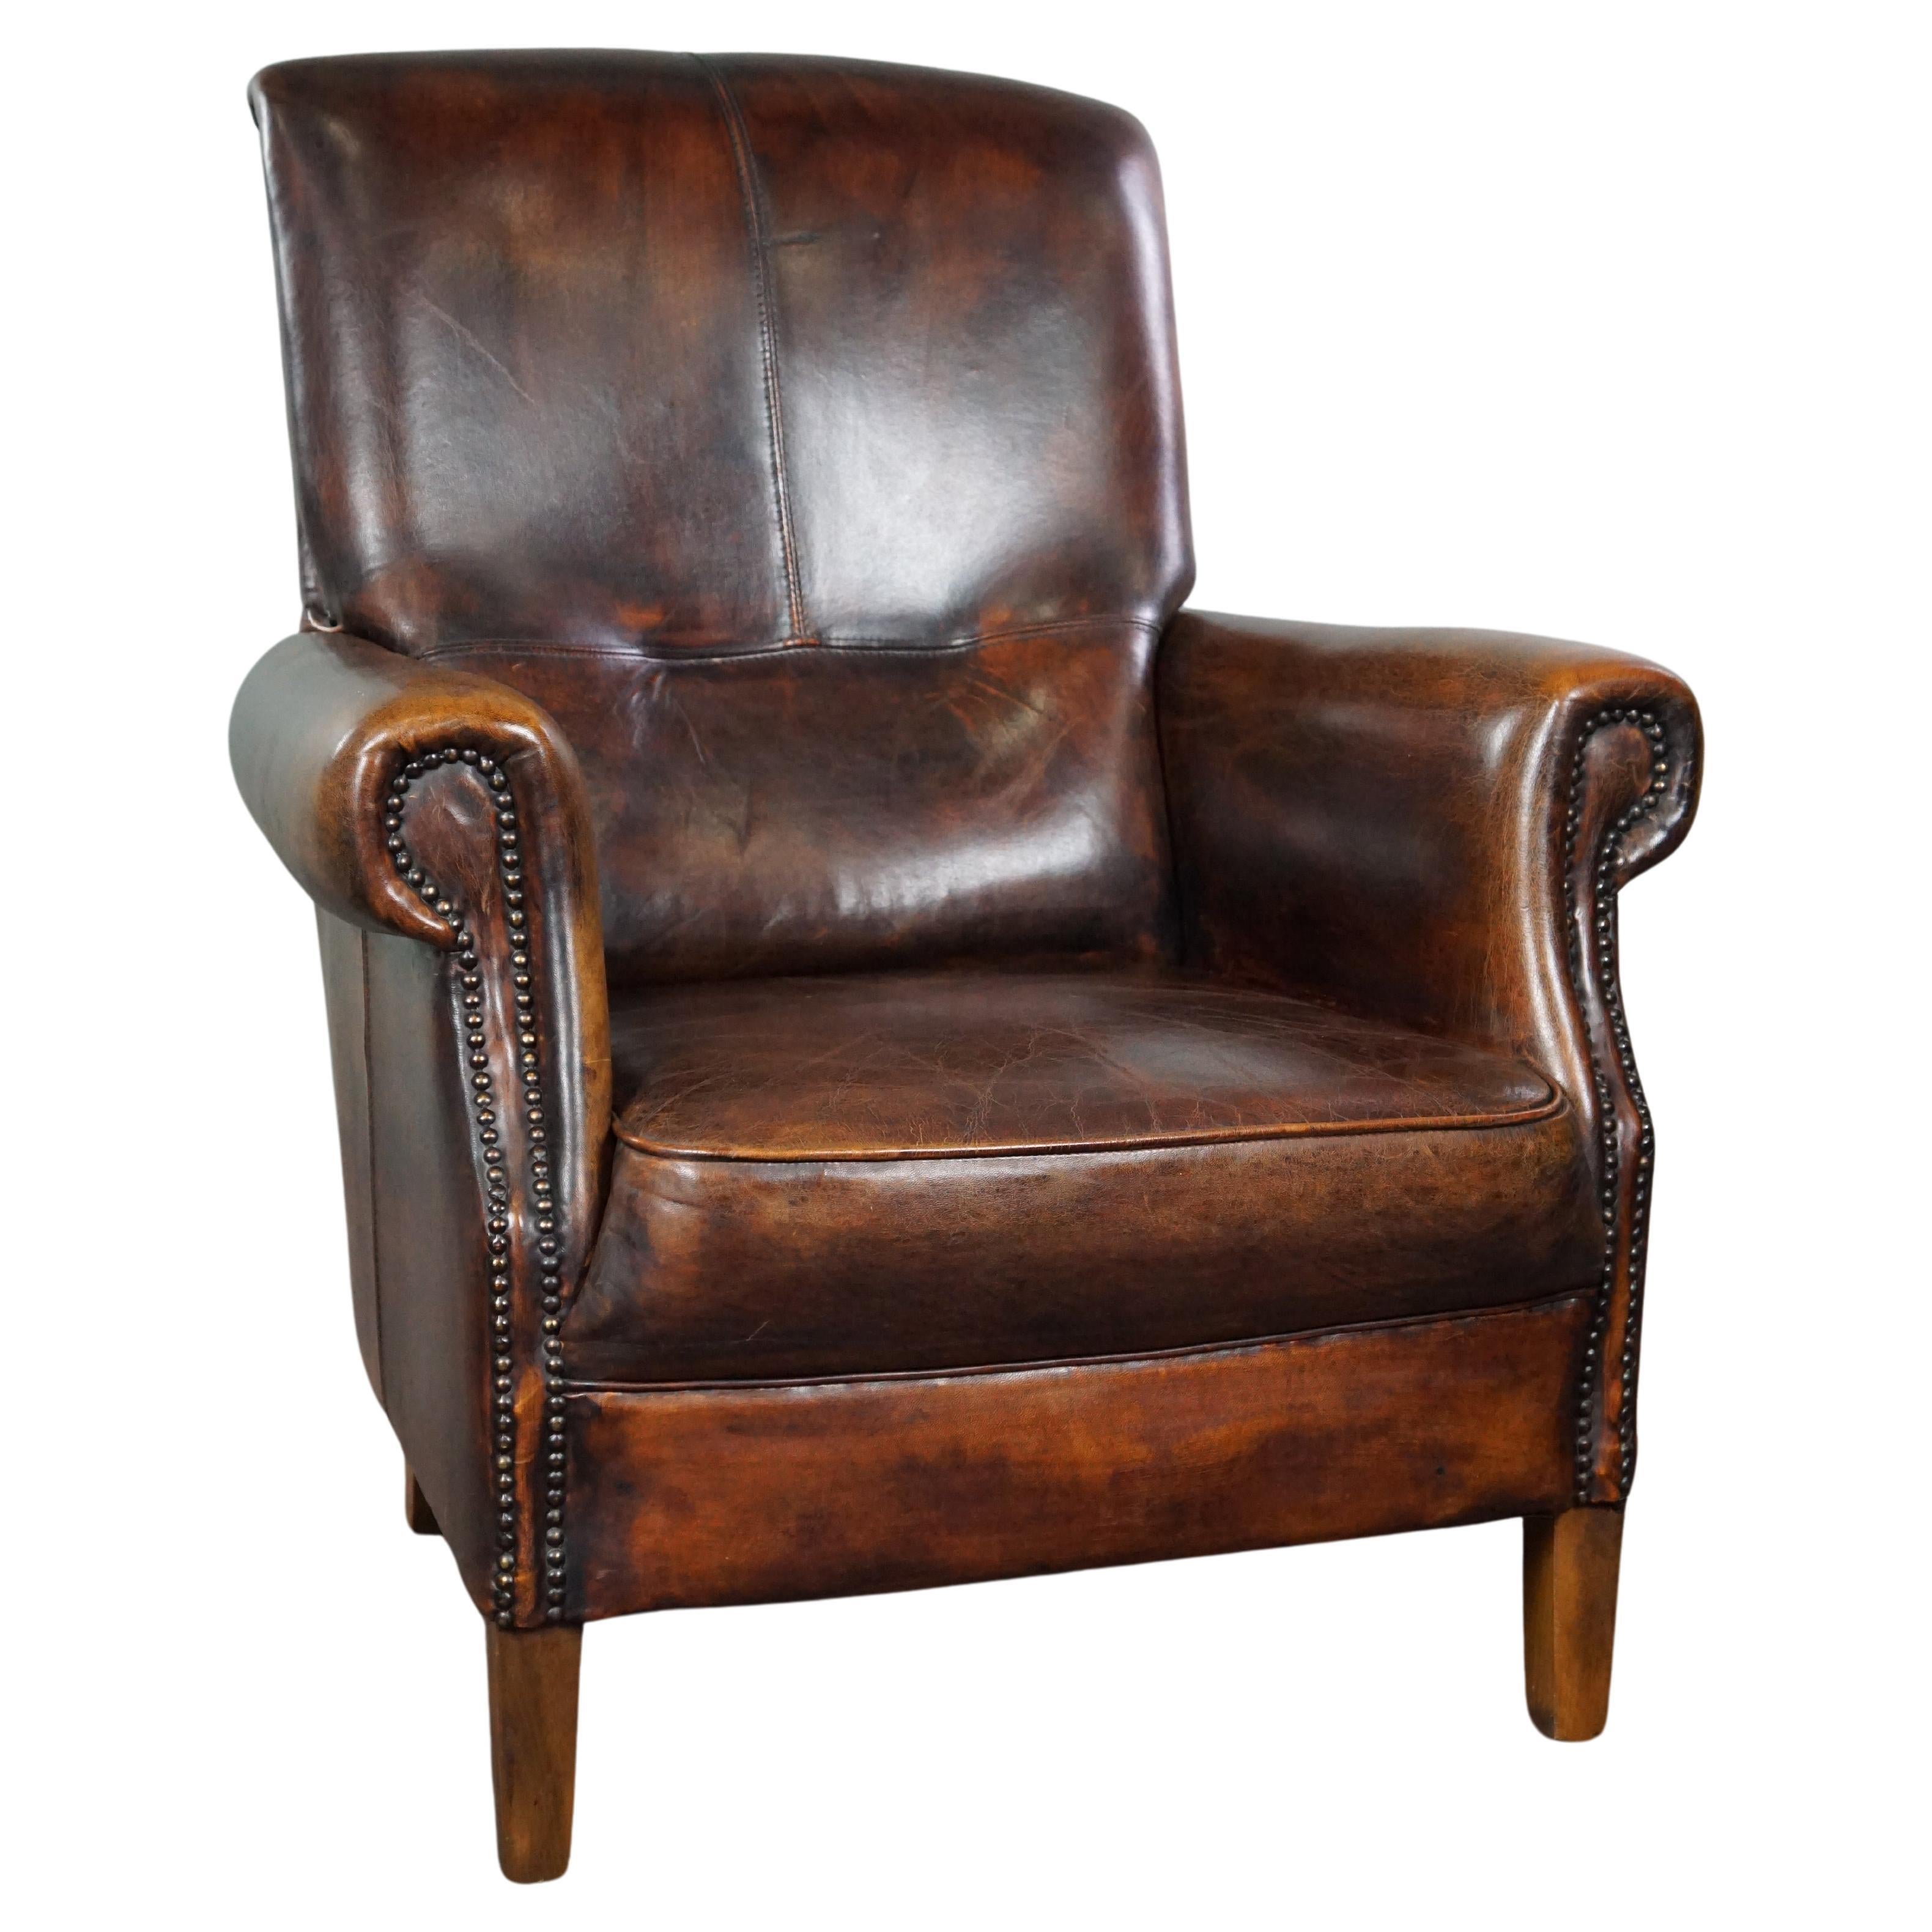 Stately sheep leather armchair, comfortable seat, and high back For Sale